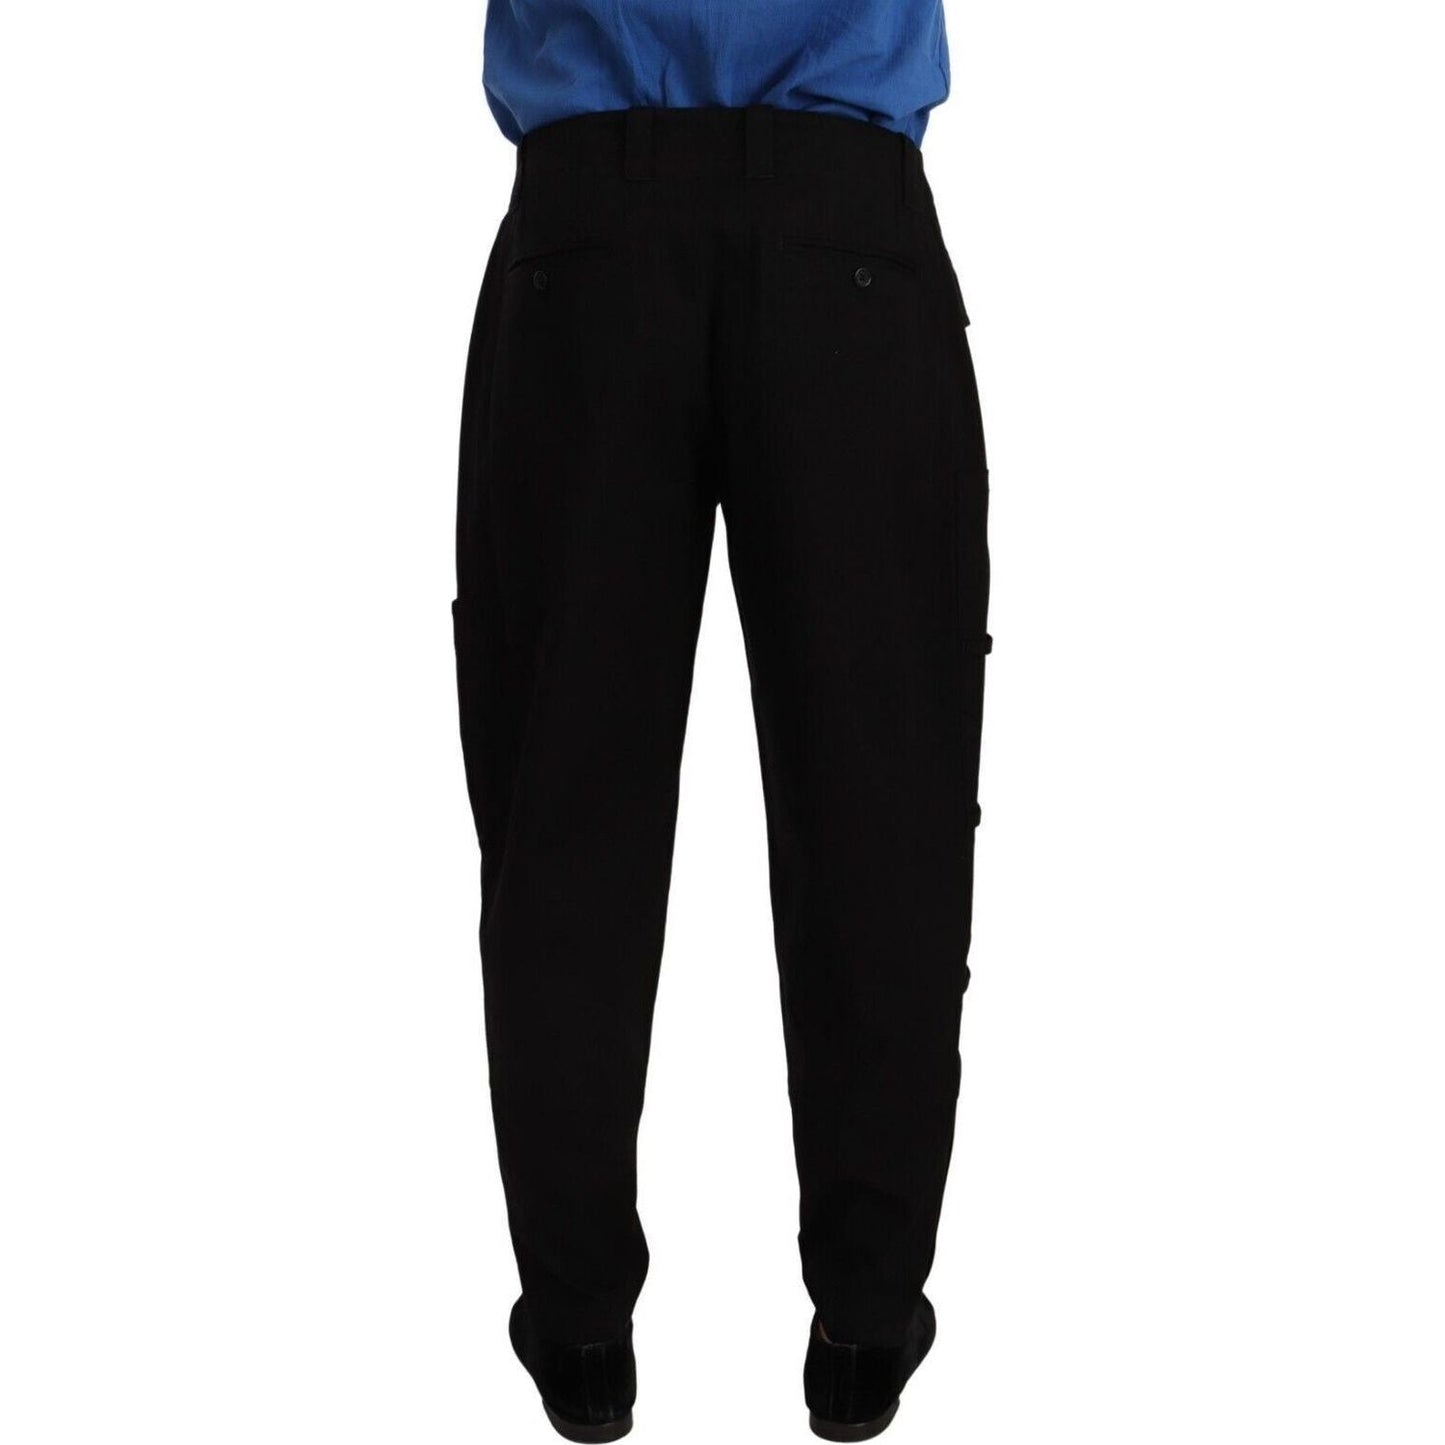 Dolce & Gabbana Chic Black Cargo Pants with Stretch Comfort black-cotton-stretch-tapered-cargo-pants